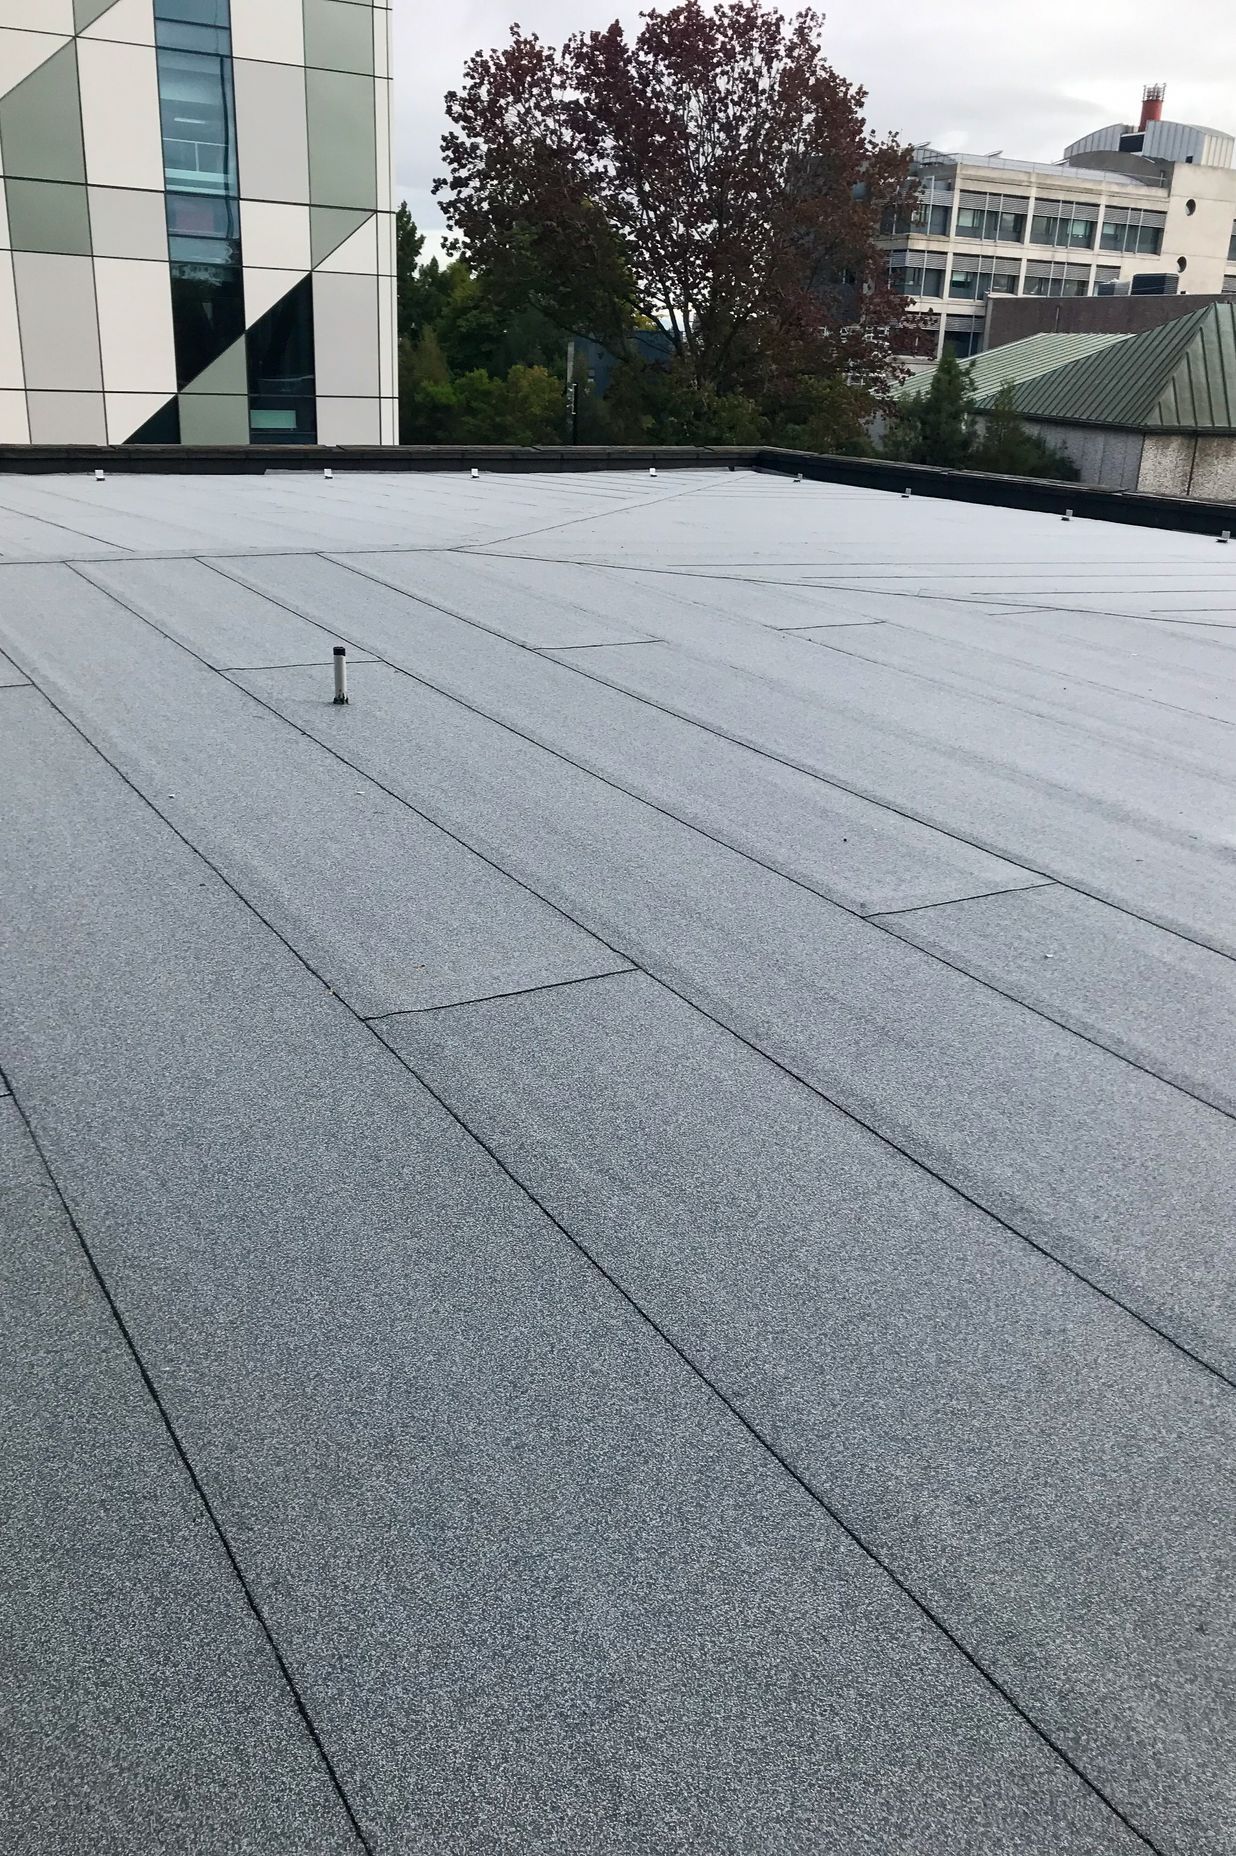 Completed Duotherm Warm Roof - Beatrice Tinsley Building